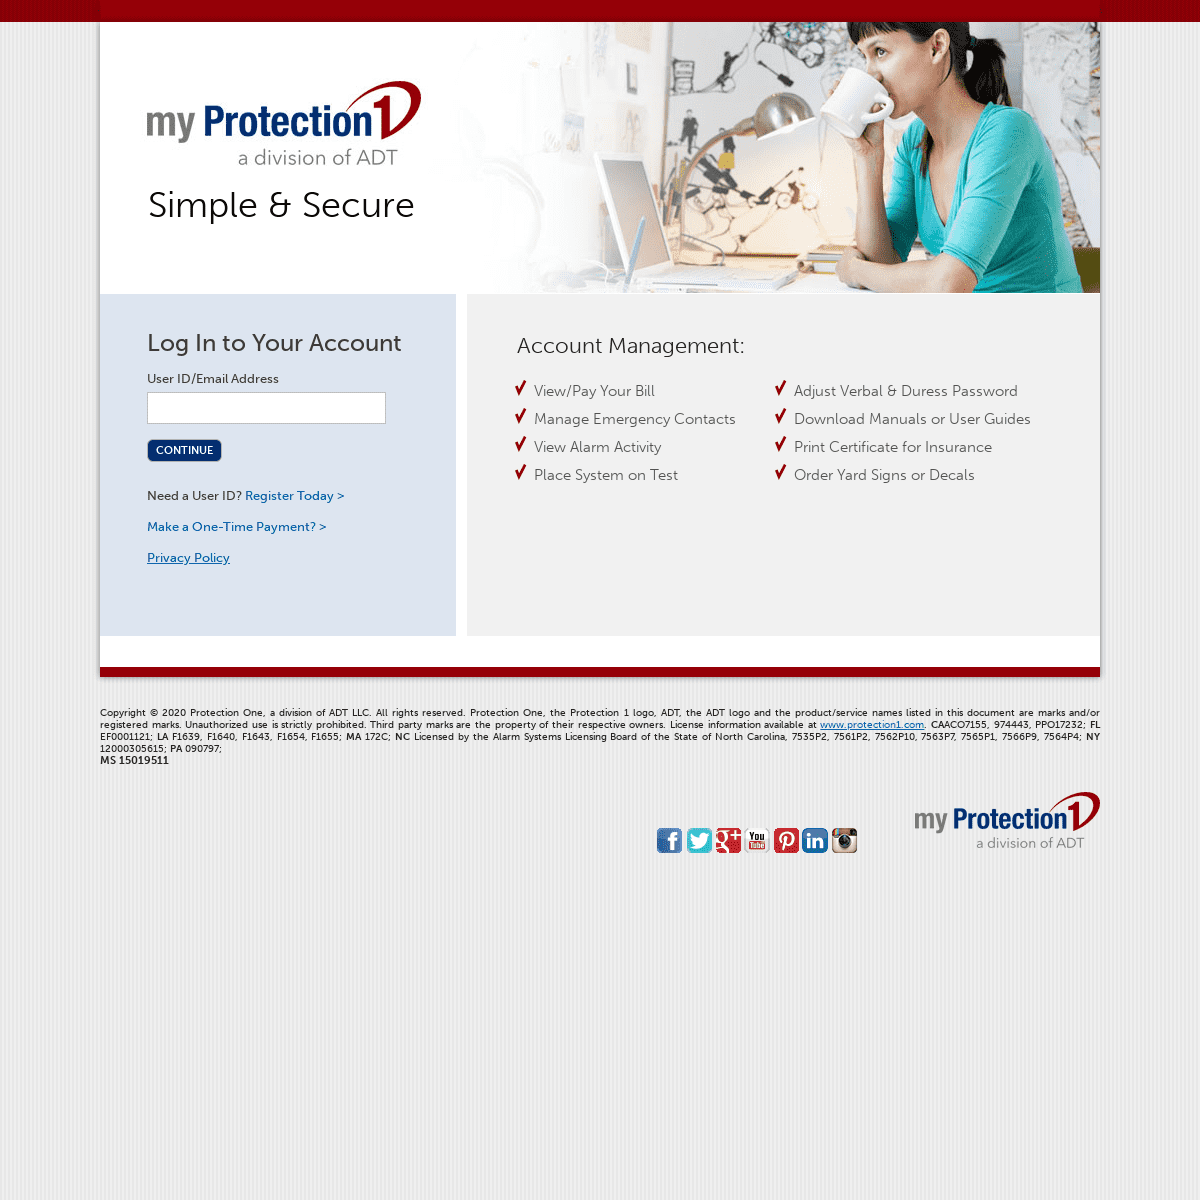 A complete backup of myprotection1.com